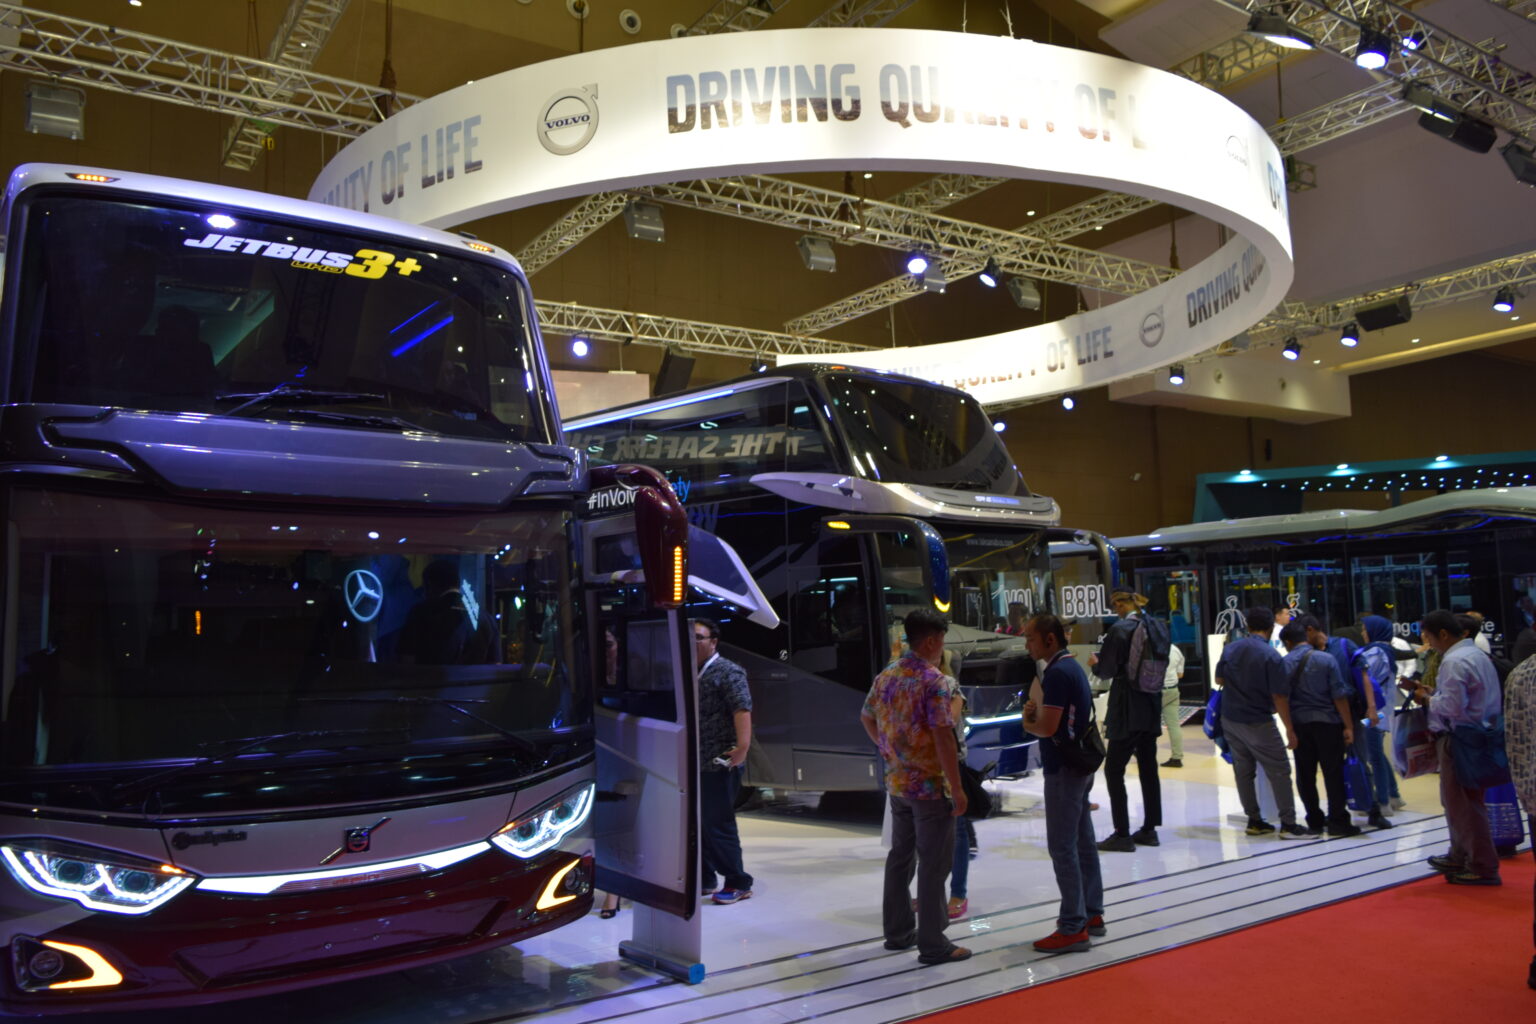 Busworld Southeast Asia is getting ready for its second edition